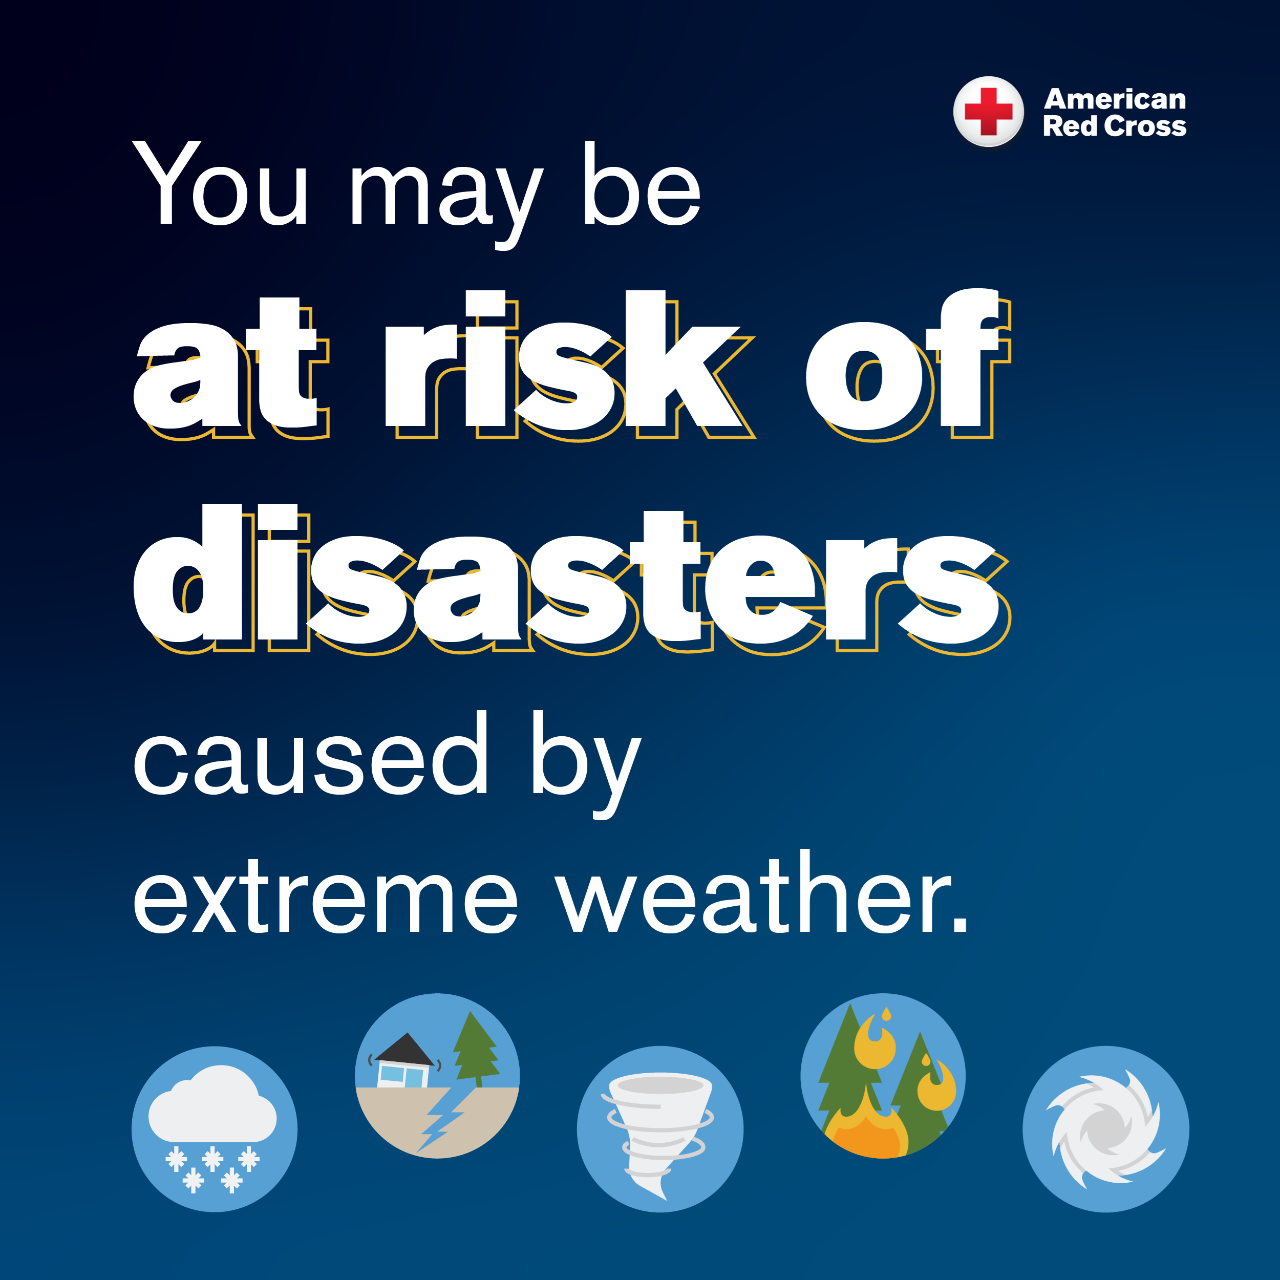 You may be at risk of disasters caused by extreme weather